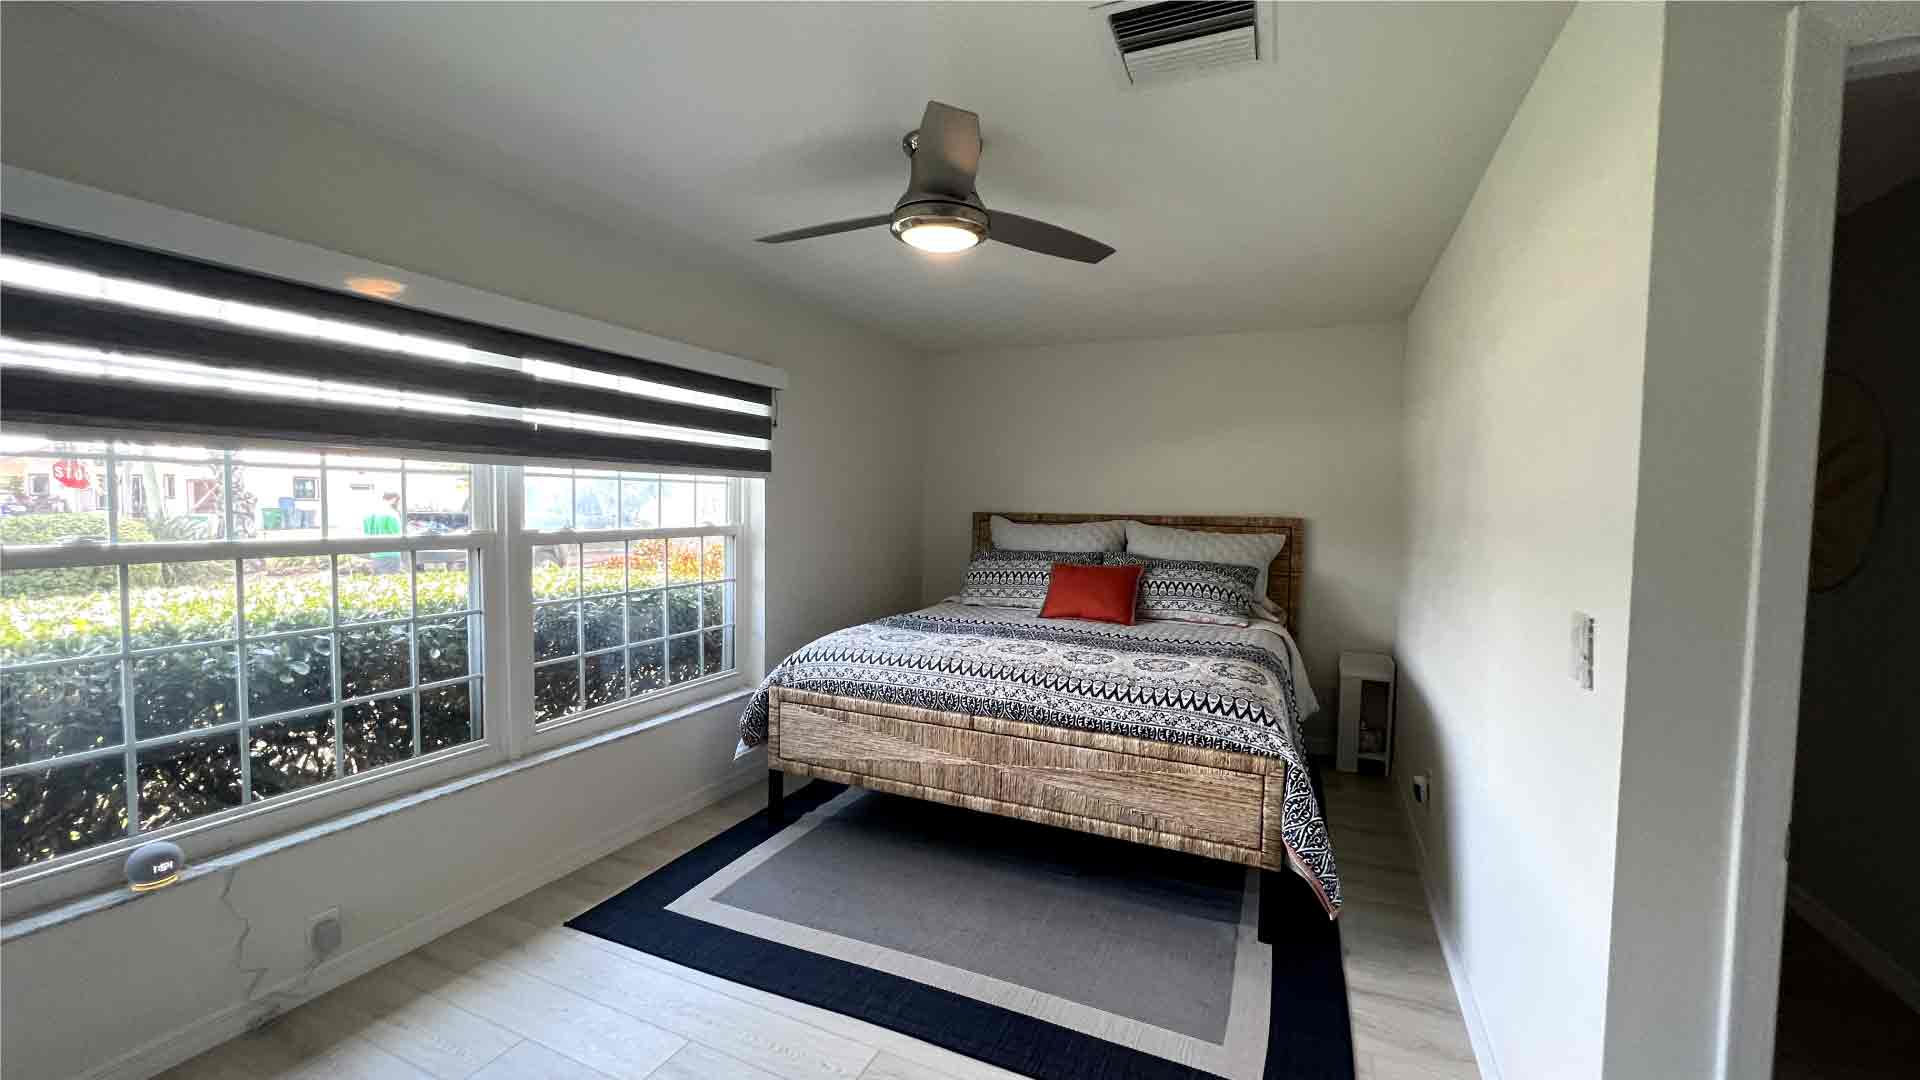 Bedroom - Deep cleaning in Cape Coral by Goldmillio - Apr 2